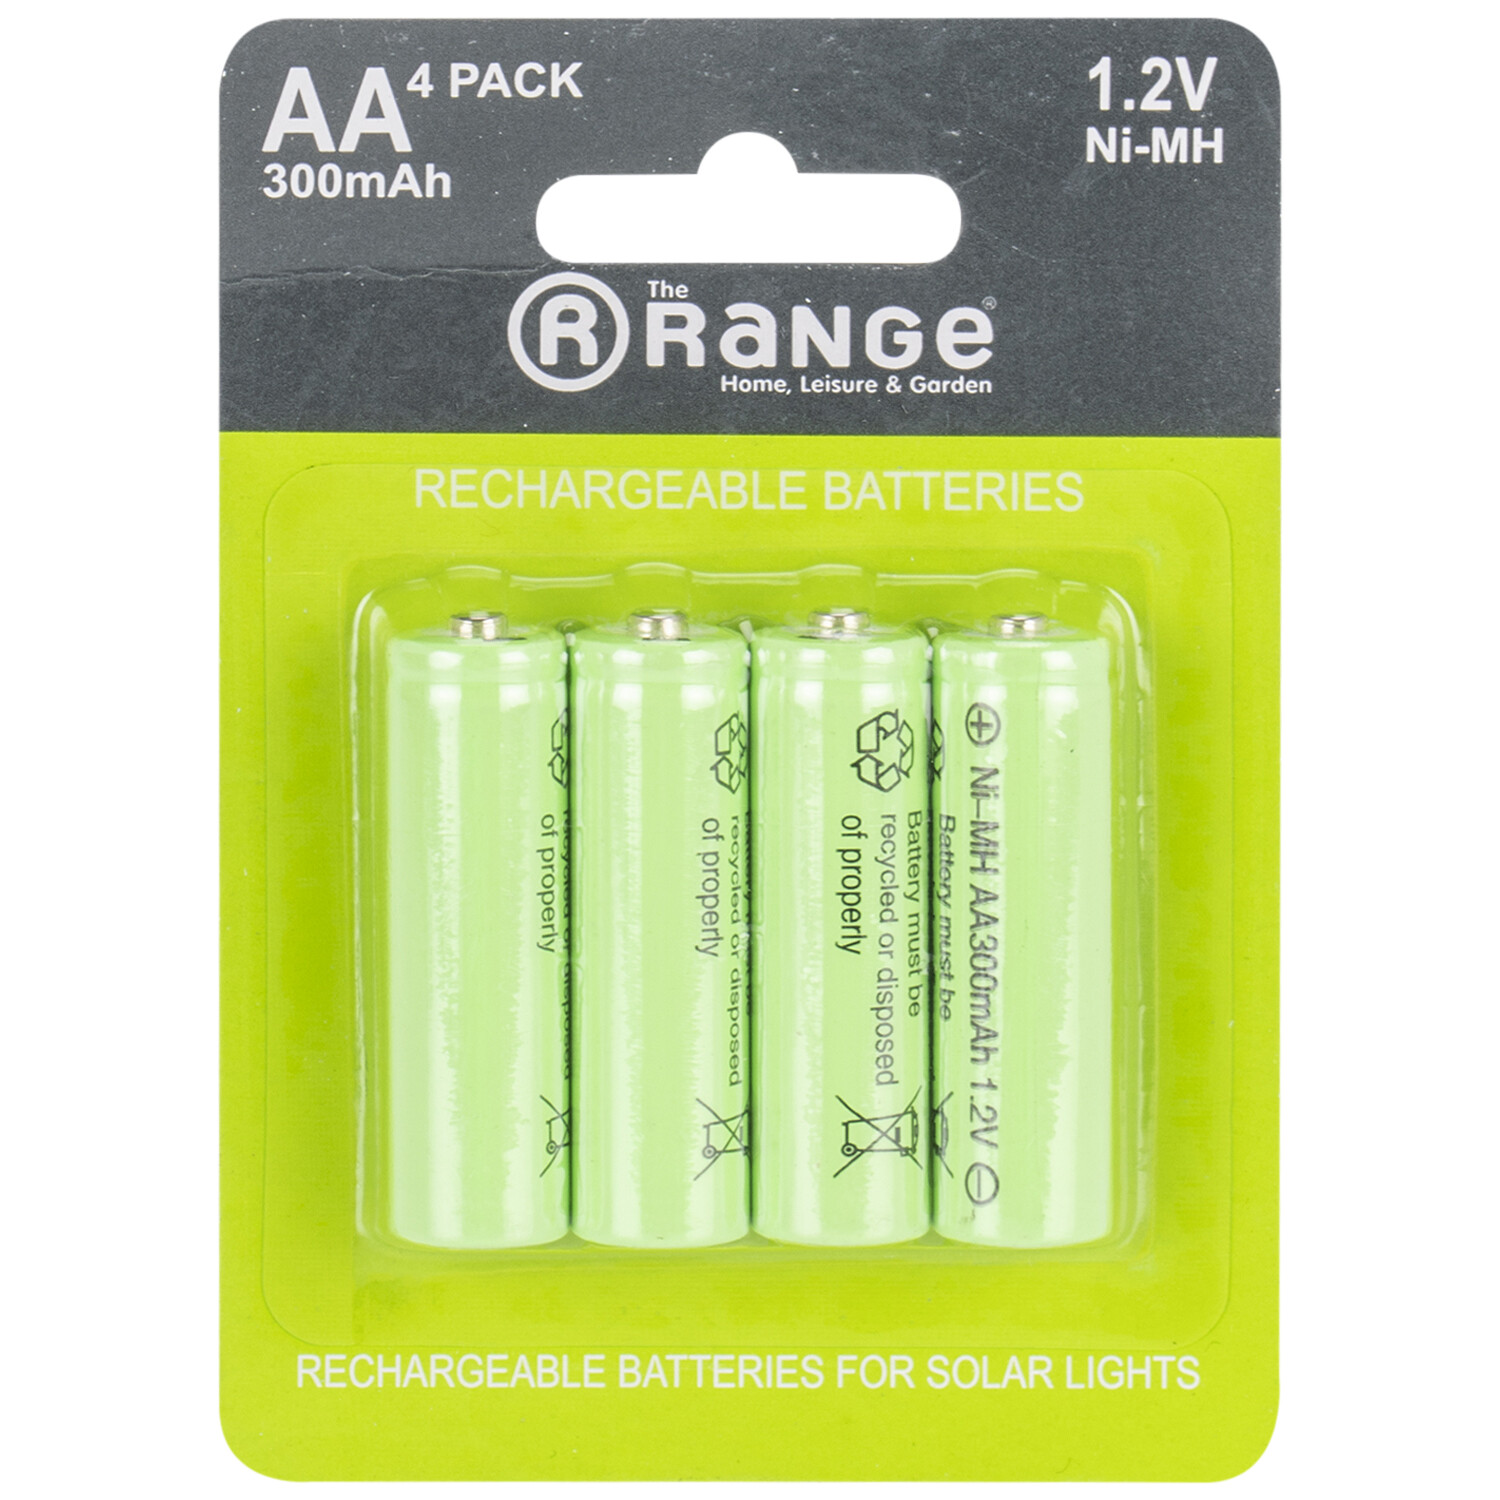 The Range AA 4 Pack Ni-MH Solar Light Rechargeable Batteries Image